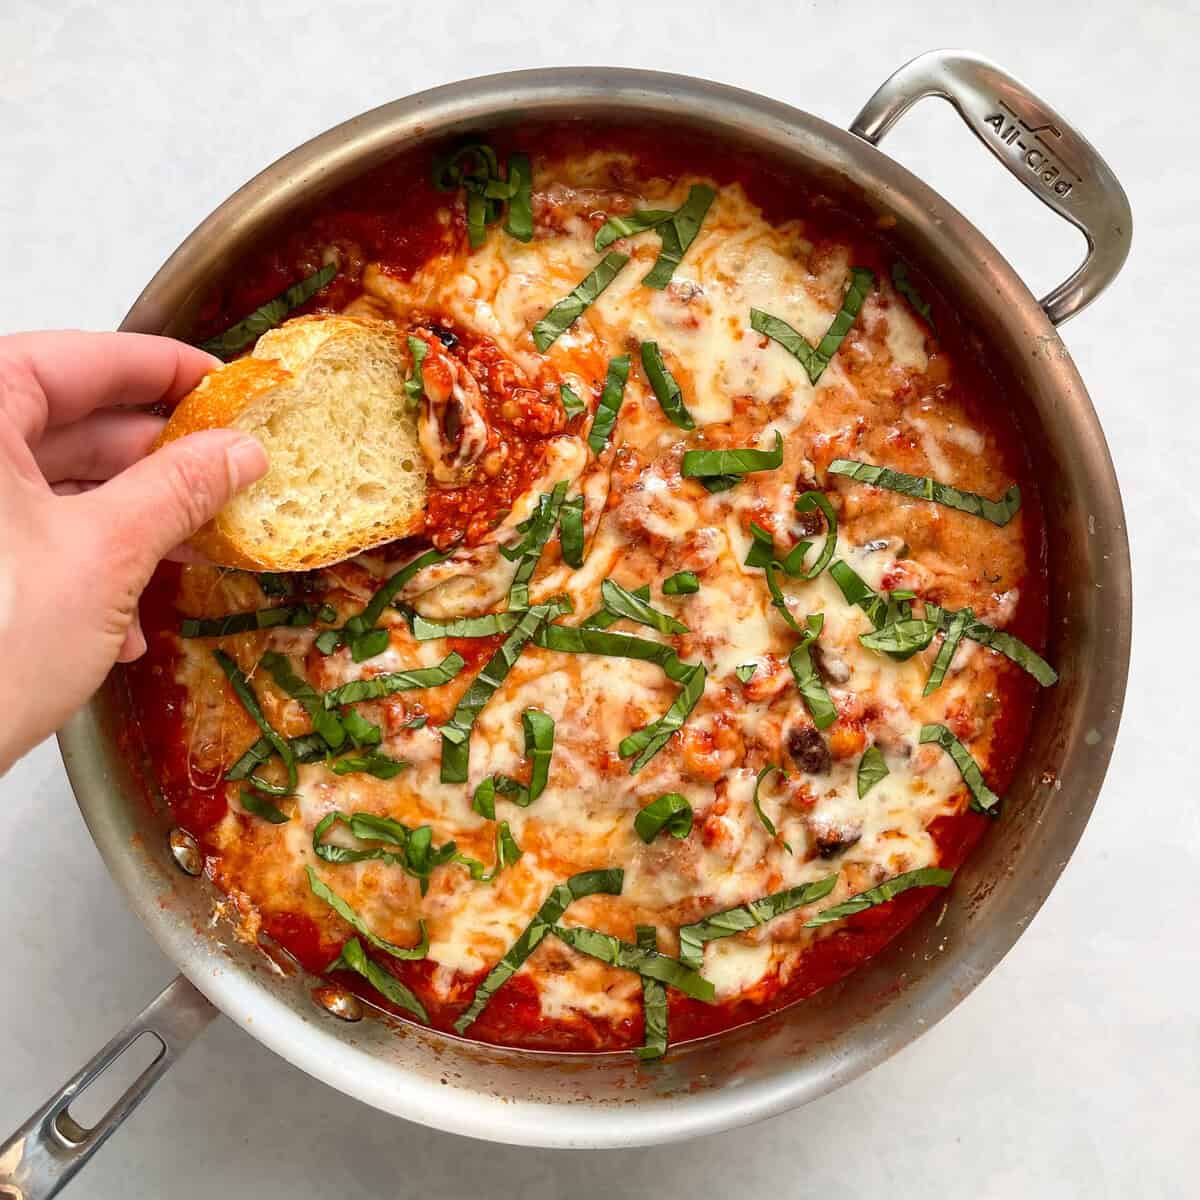 frying pan with a hand dipping a piece of crusty toast into frying pan full of beans, tomato sauce, and melted cheese topped with basil slivers.